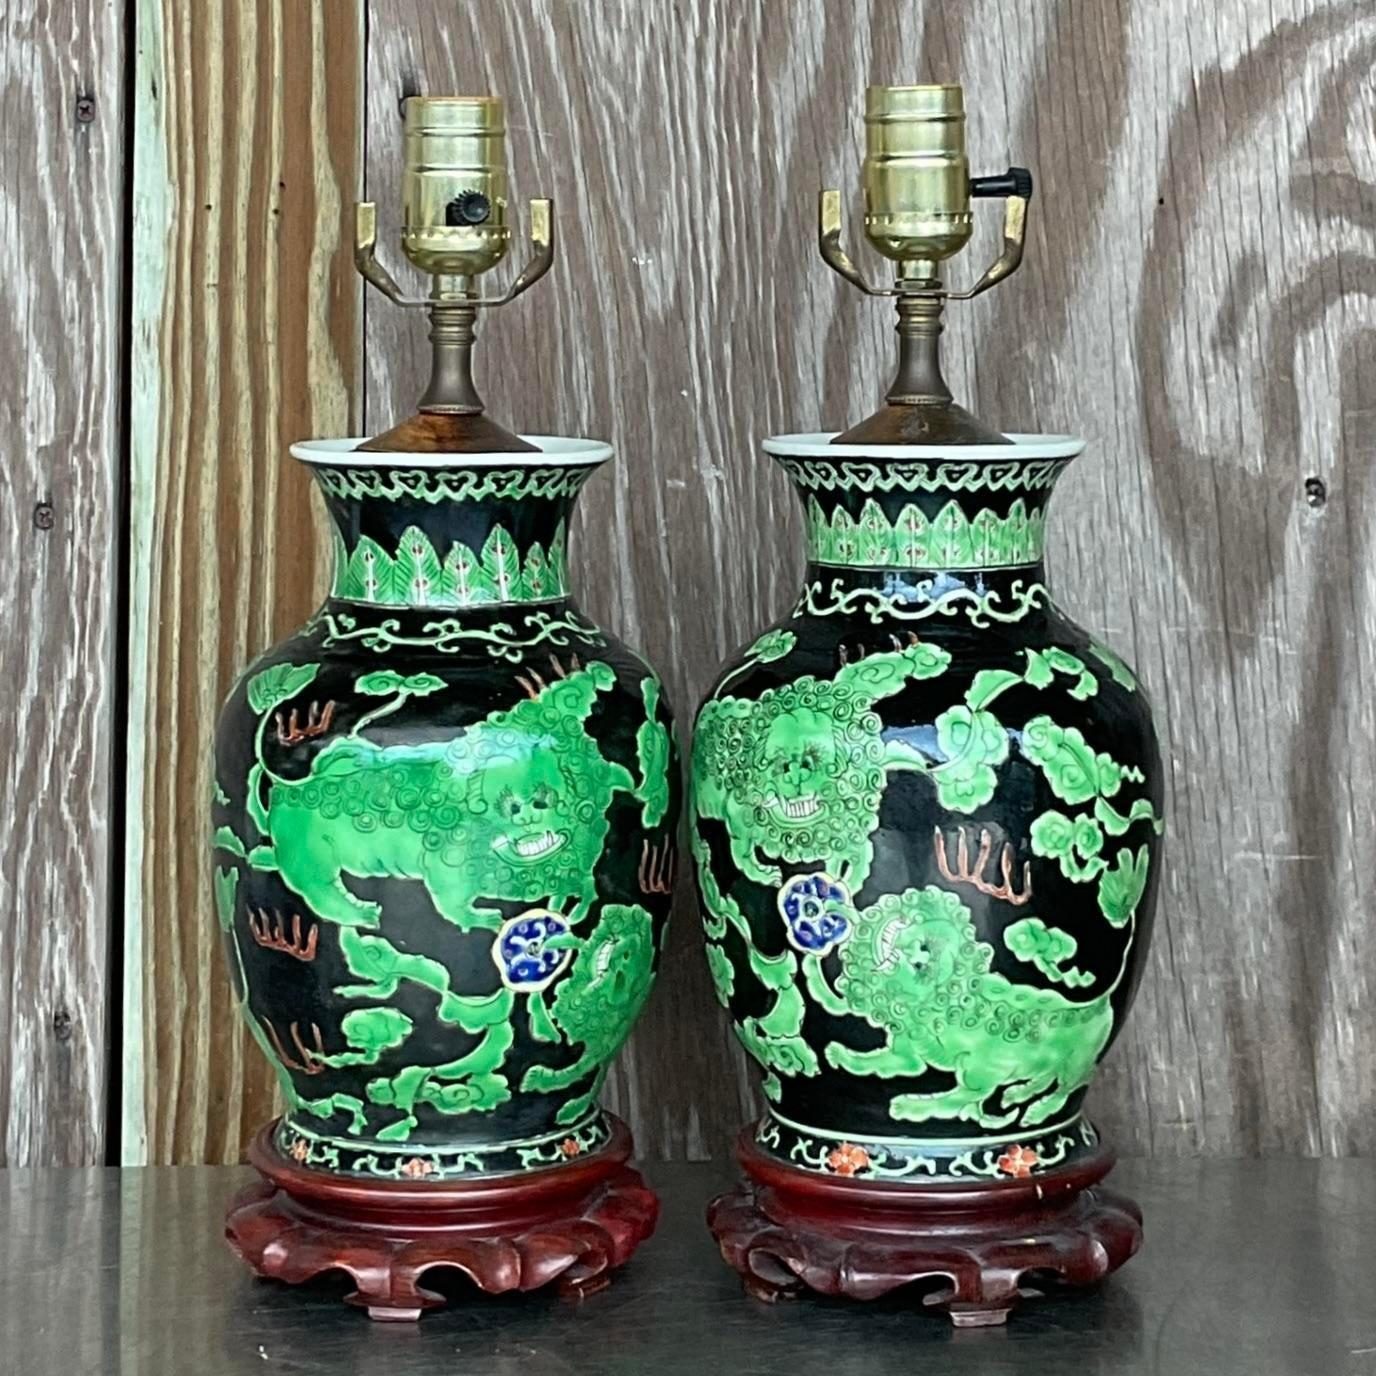 A fabulous pair of vintage Asian table lamps. A classic Ginger jar shape with stunning hand painted scenes with dragons. Brilliantly colored. Acquired from a Palm Beach estate.